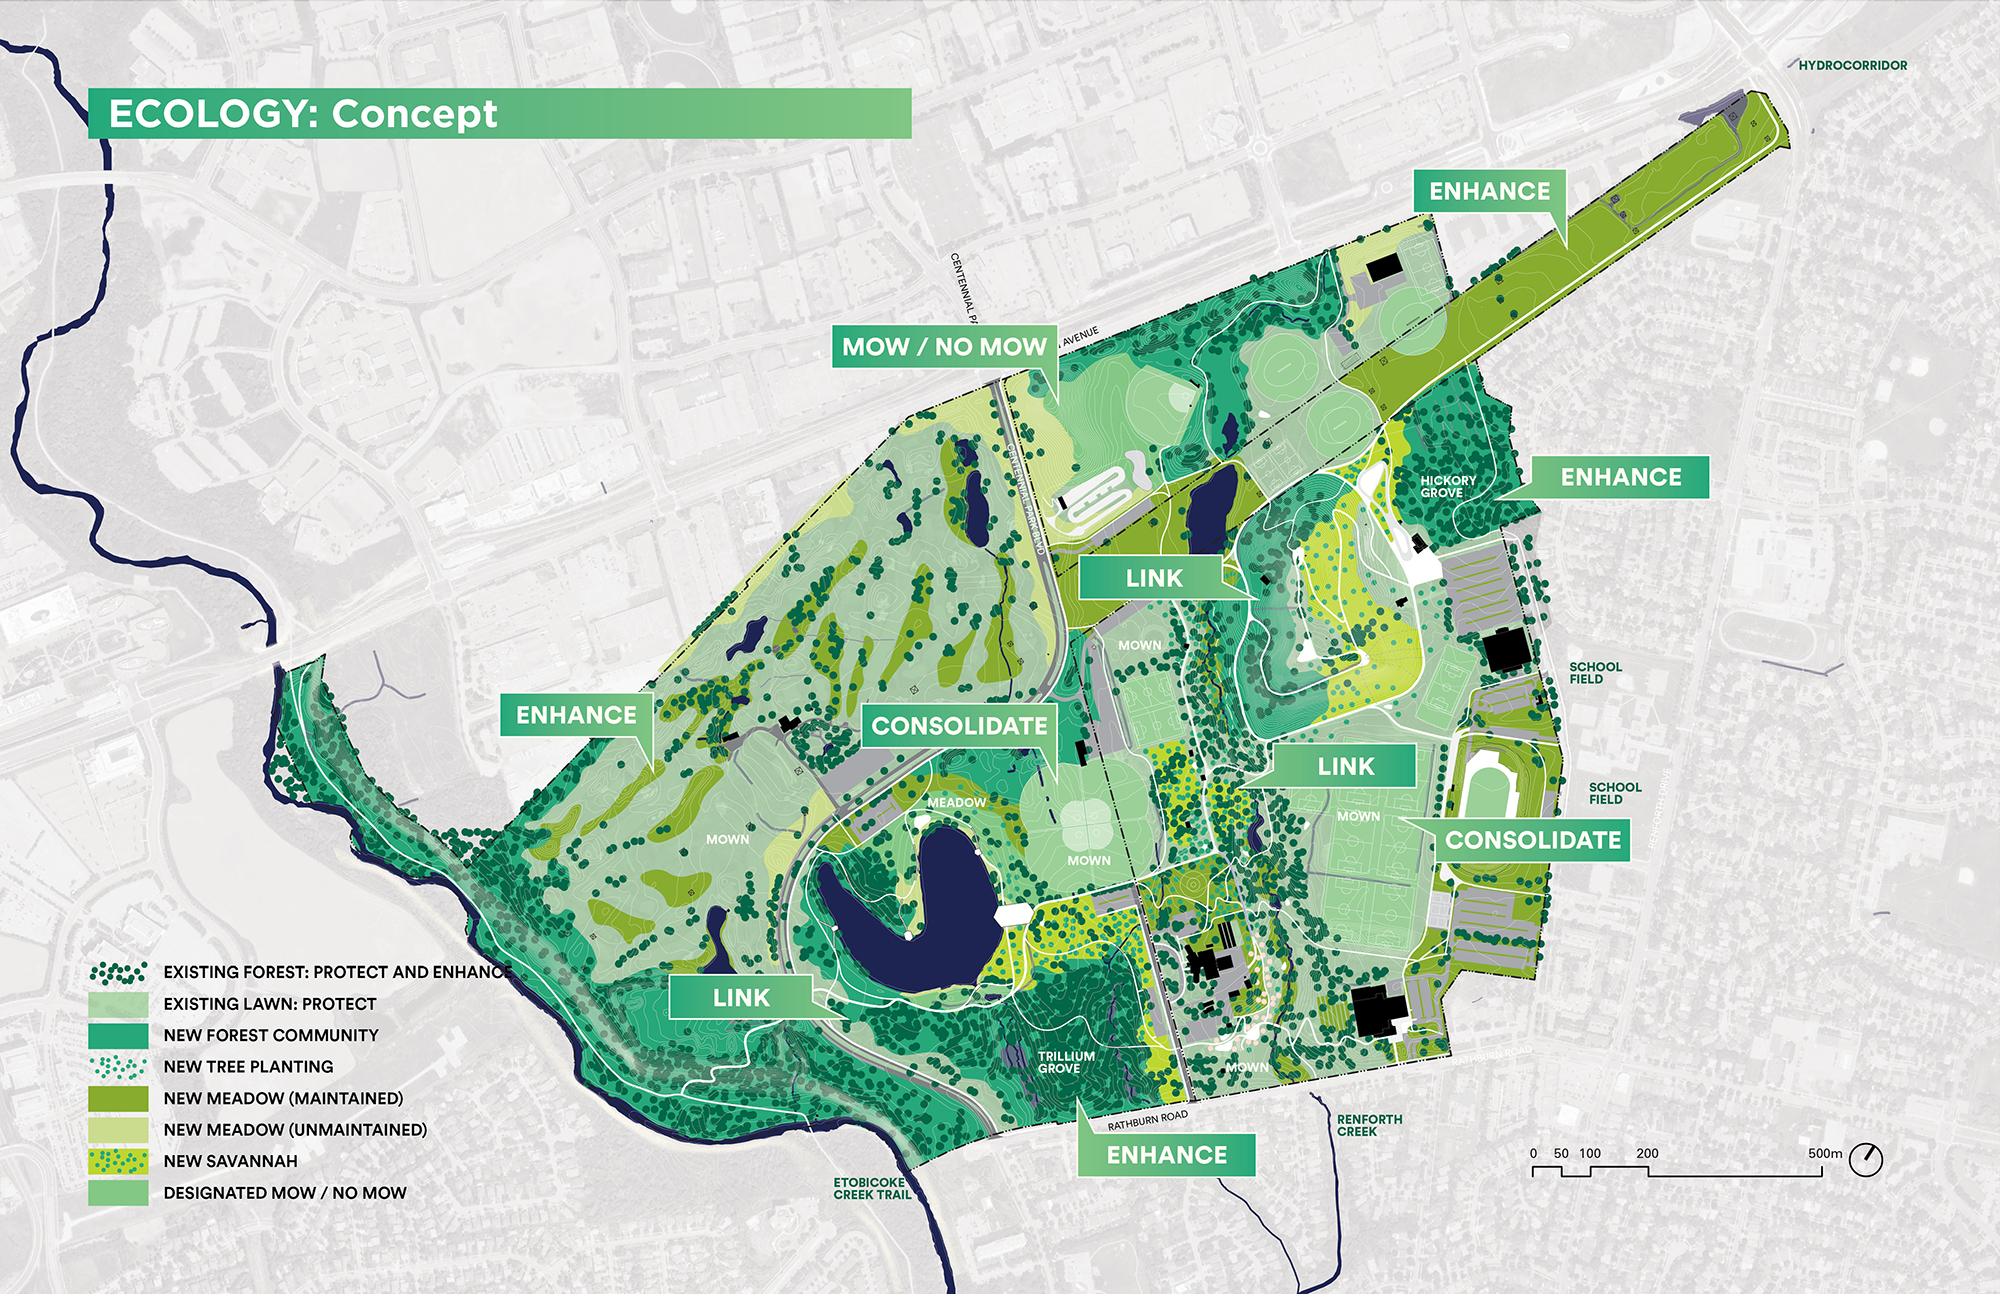 This plan image depicts the ecology concept. This includes an east-west linkage between the forested areas with increased tree and understory planting, conversion of some mowed areas to maintained and unmaintainted meadows and savannahs, and the consolidation of recreation to allow for site-wide, linked restoration